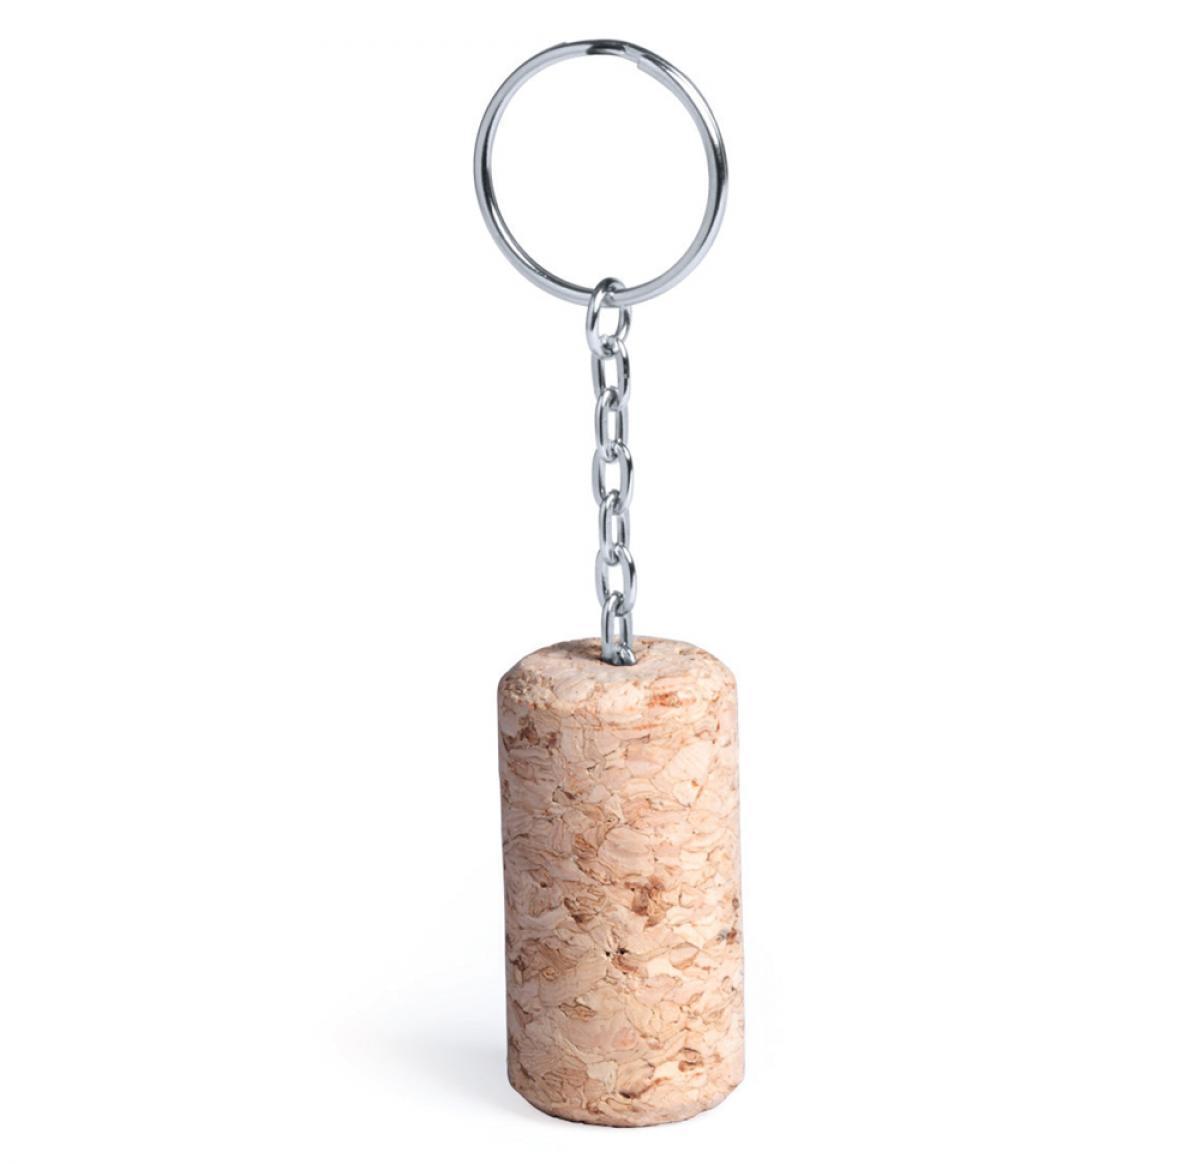 Cork Keyring - Buy Promotional Products 